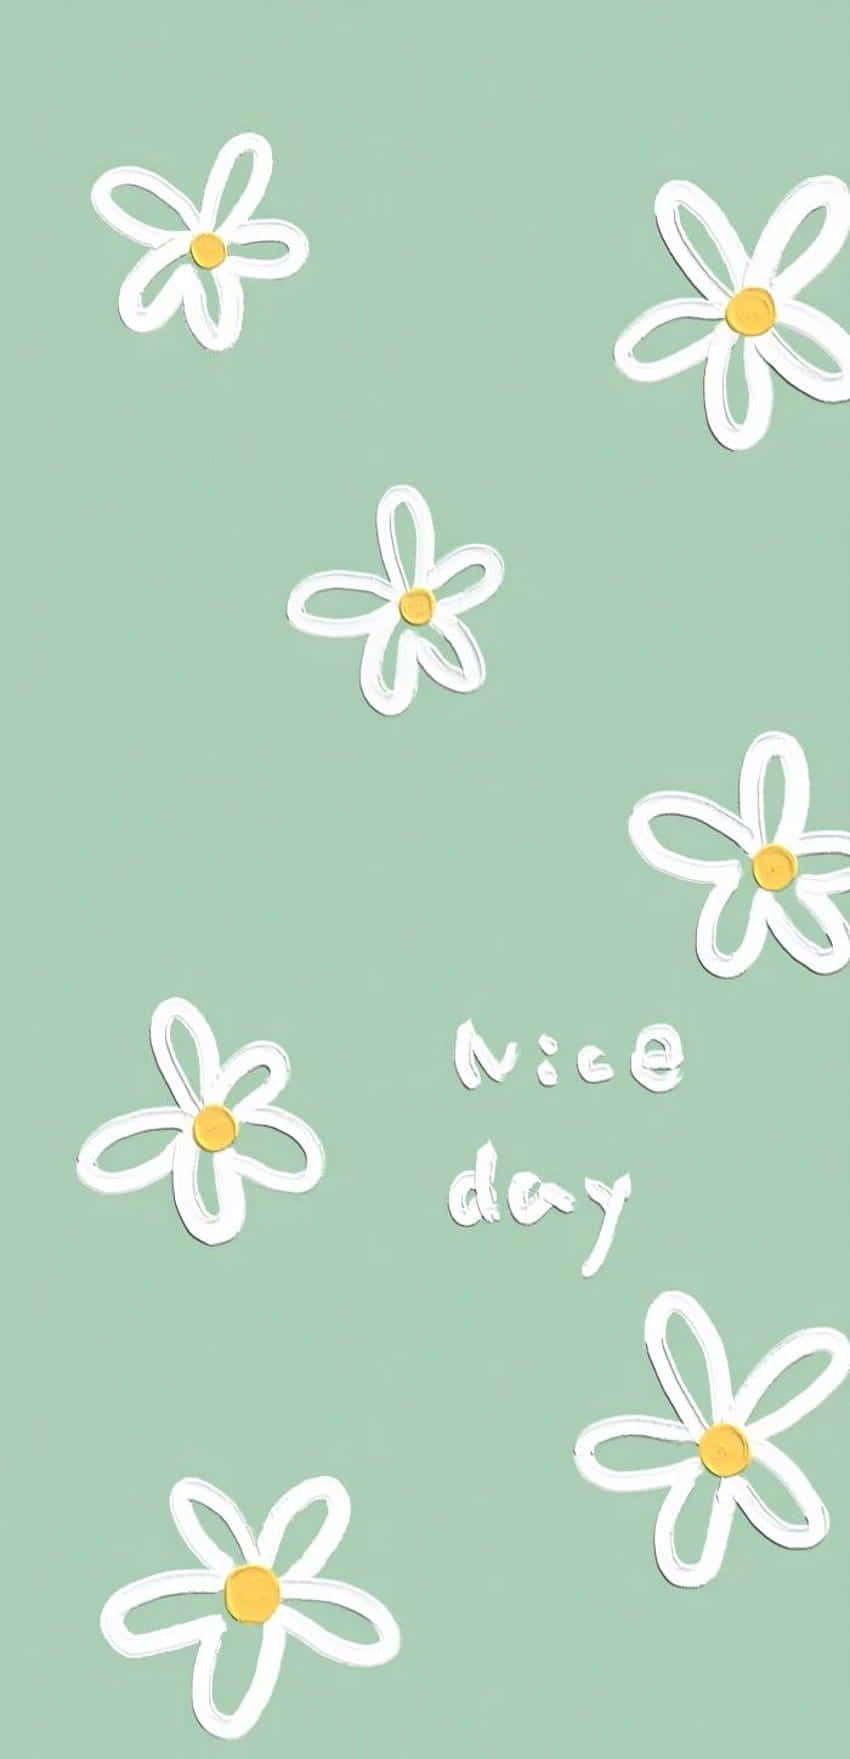 Download Cute Sage Green White Daisies Nice Day Wallpaper | Wallpapers.com